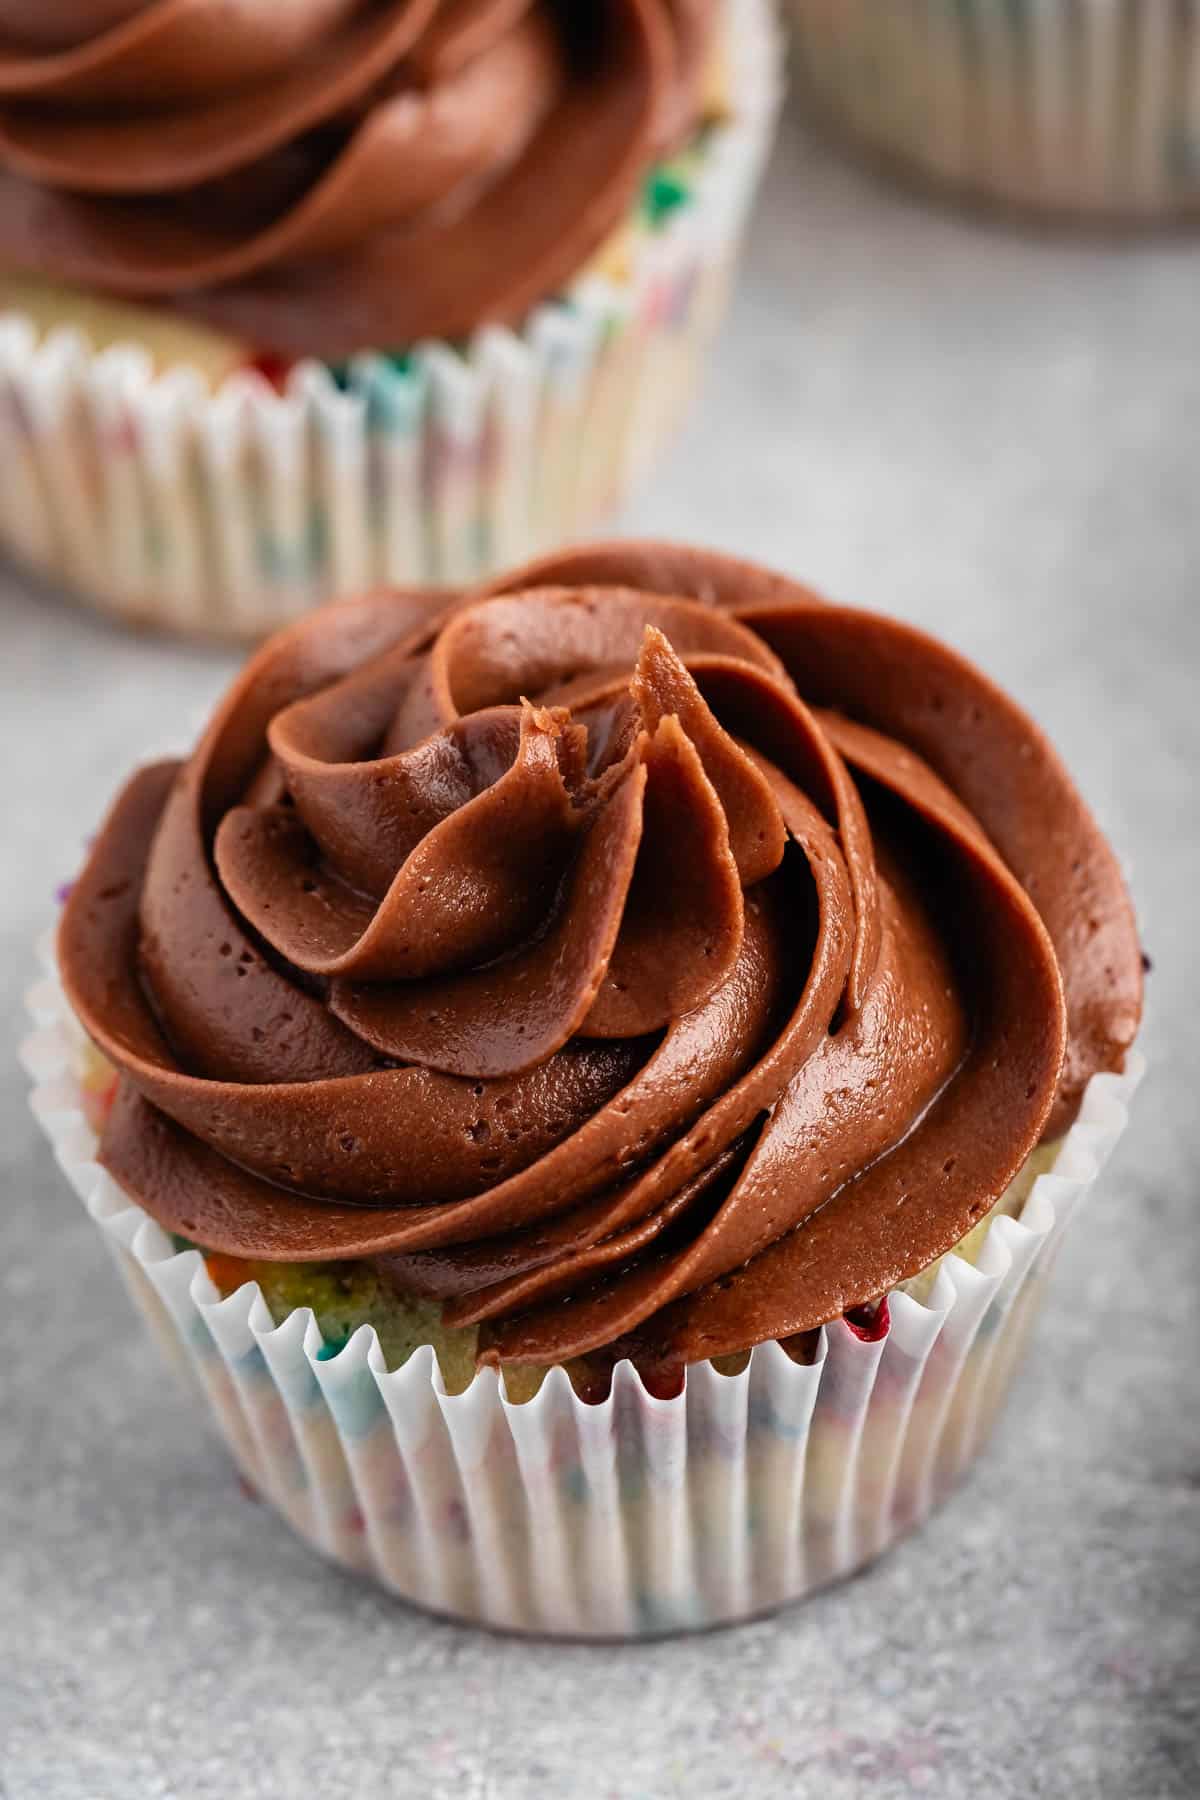 cupcake with chocolate frosting close up